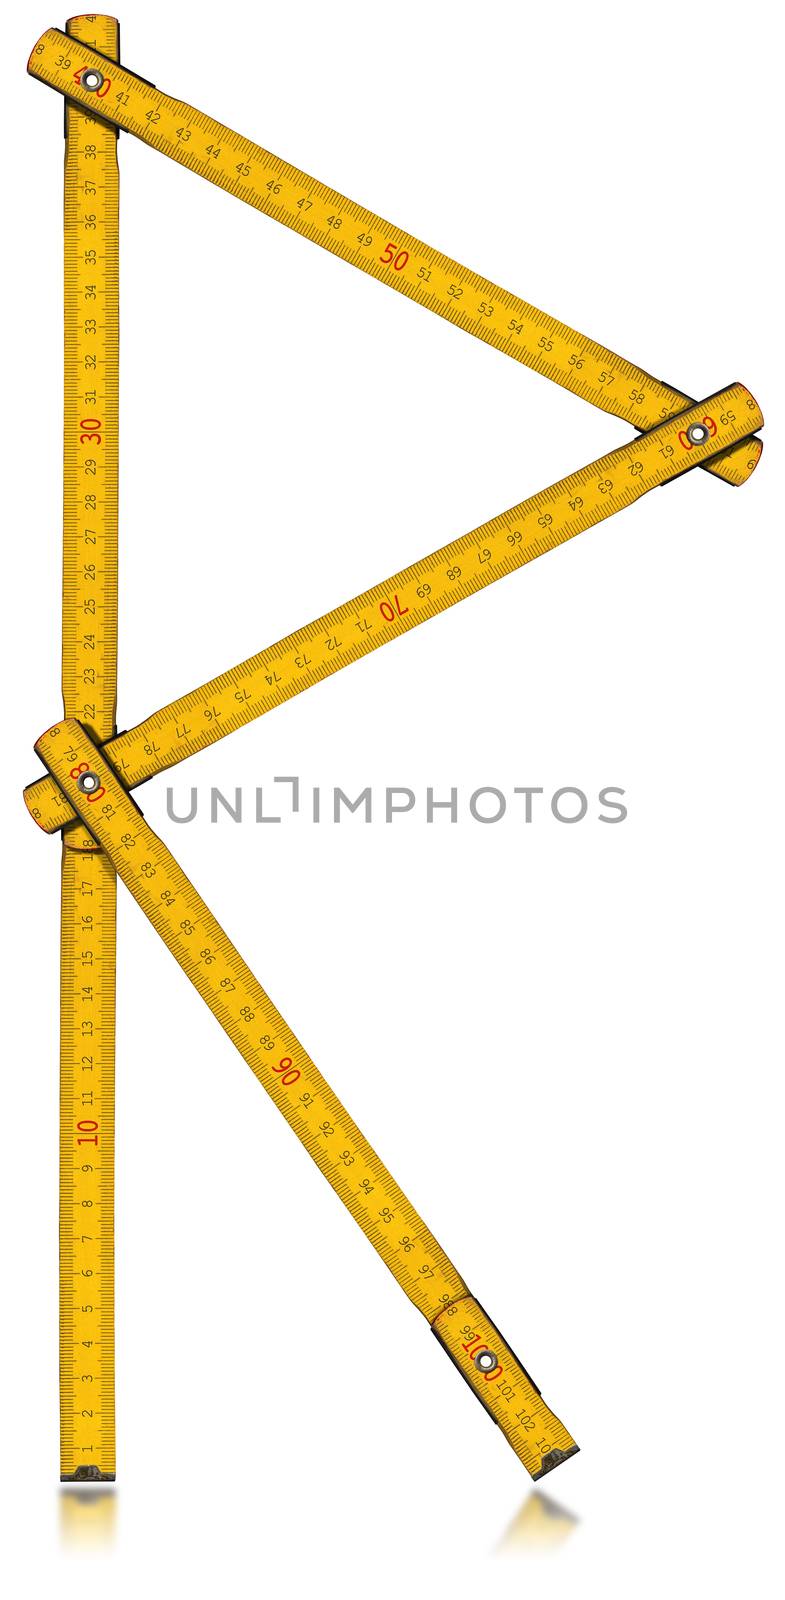 Font R - Old Yellow Meter Ruler by catalby